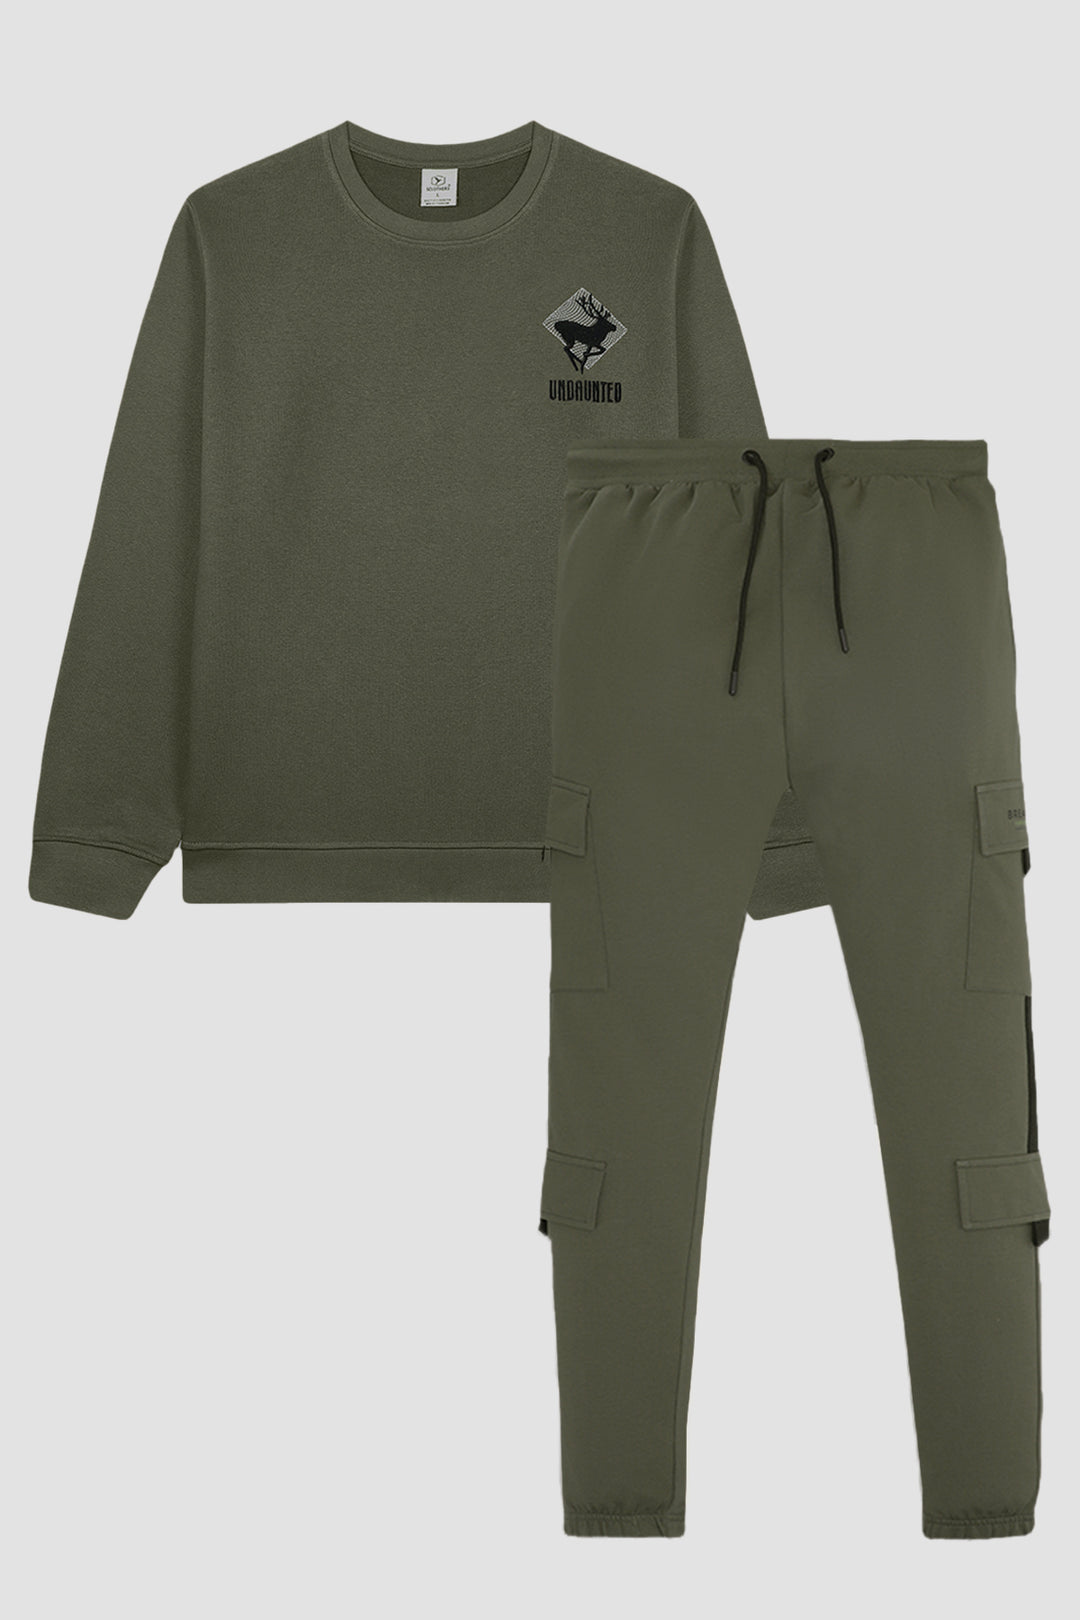 Undaunted Army Green Coord Set (Plus Size) - W23 - MHC008P